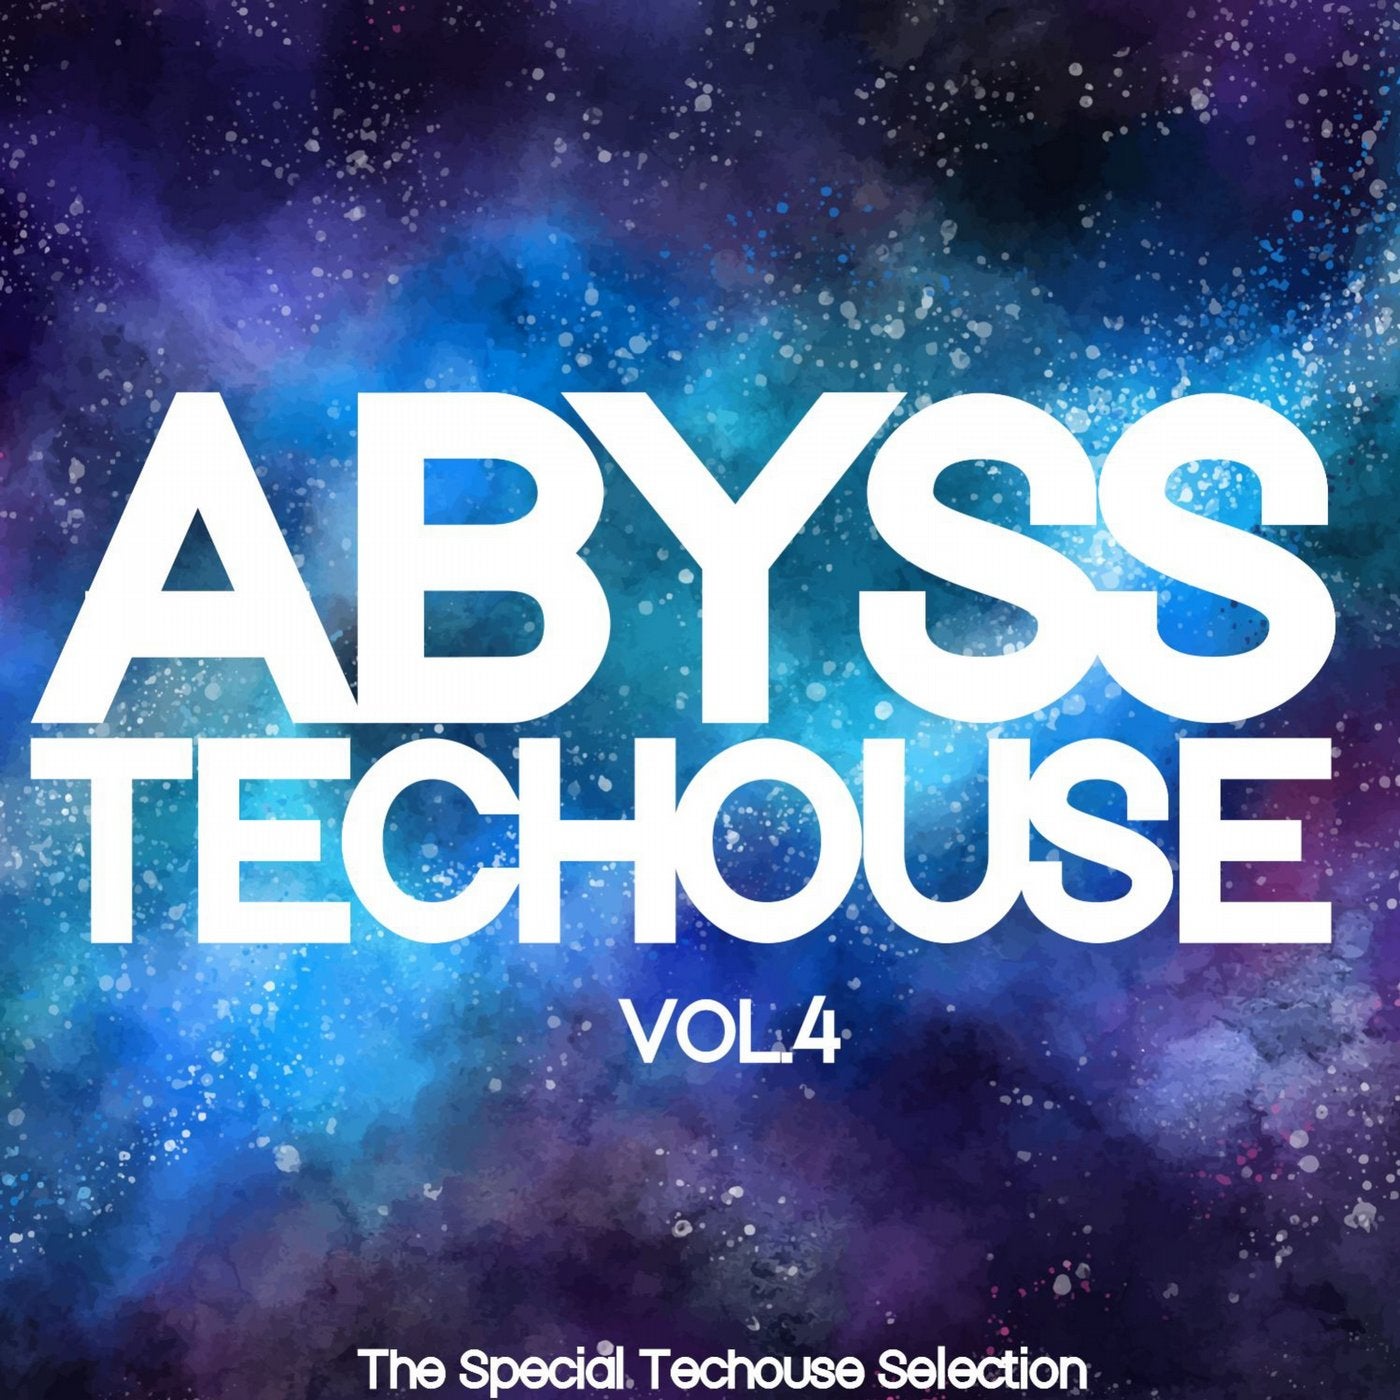 Abyss Techouse, Vol. 4